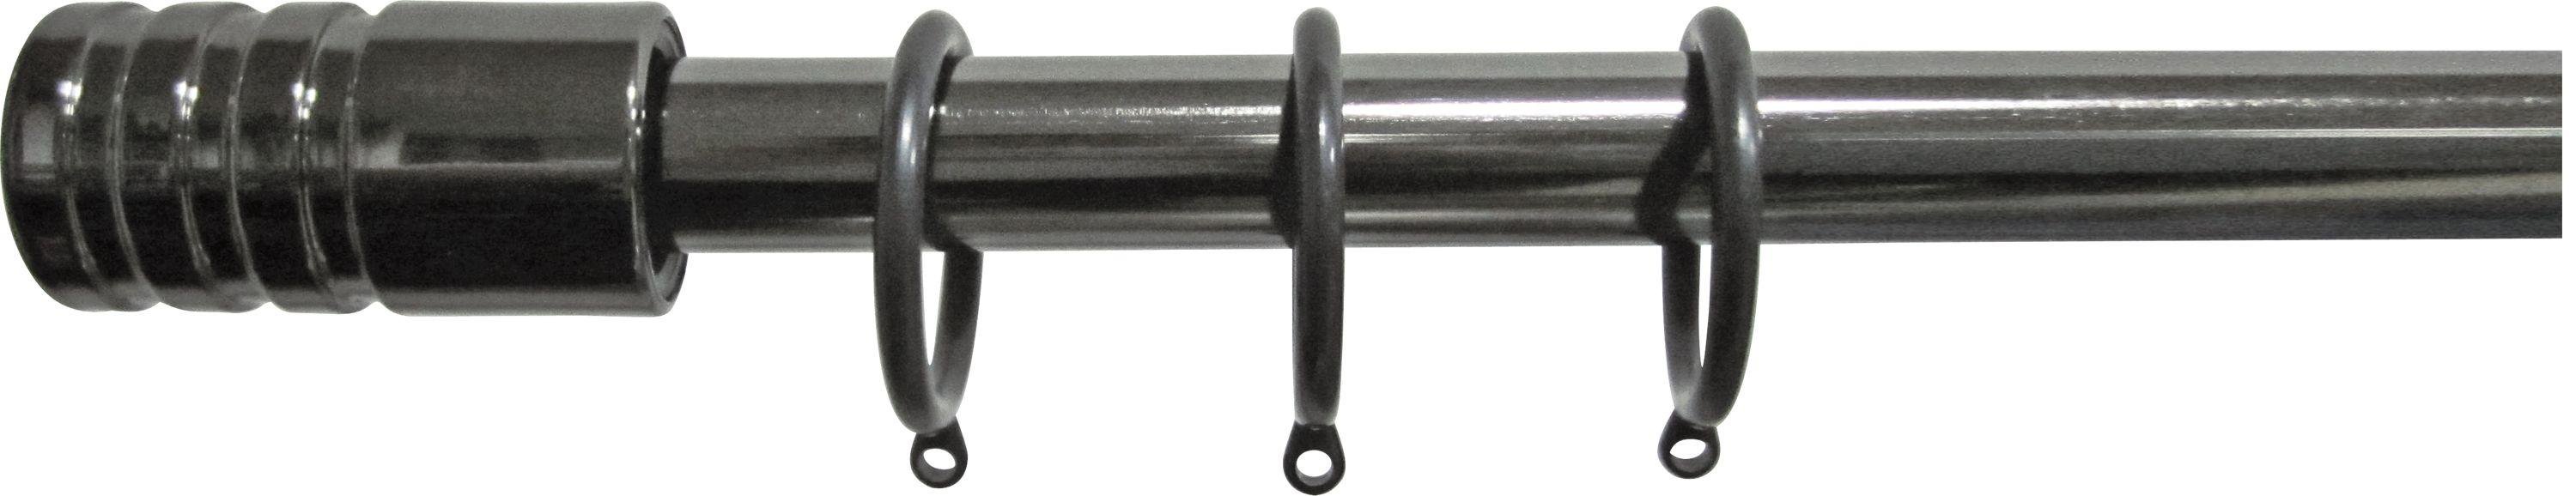 Argos Home Ext Metal Grooved Curtain Pole Set-Black Nickel